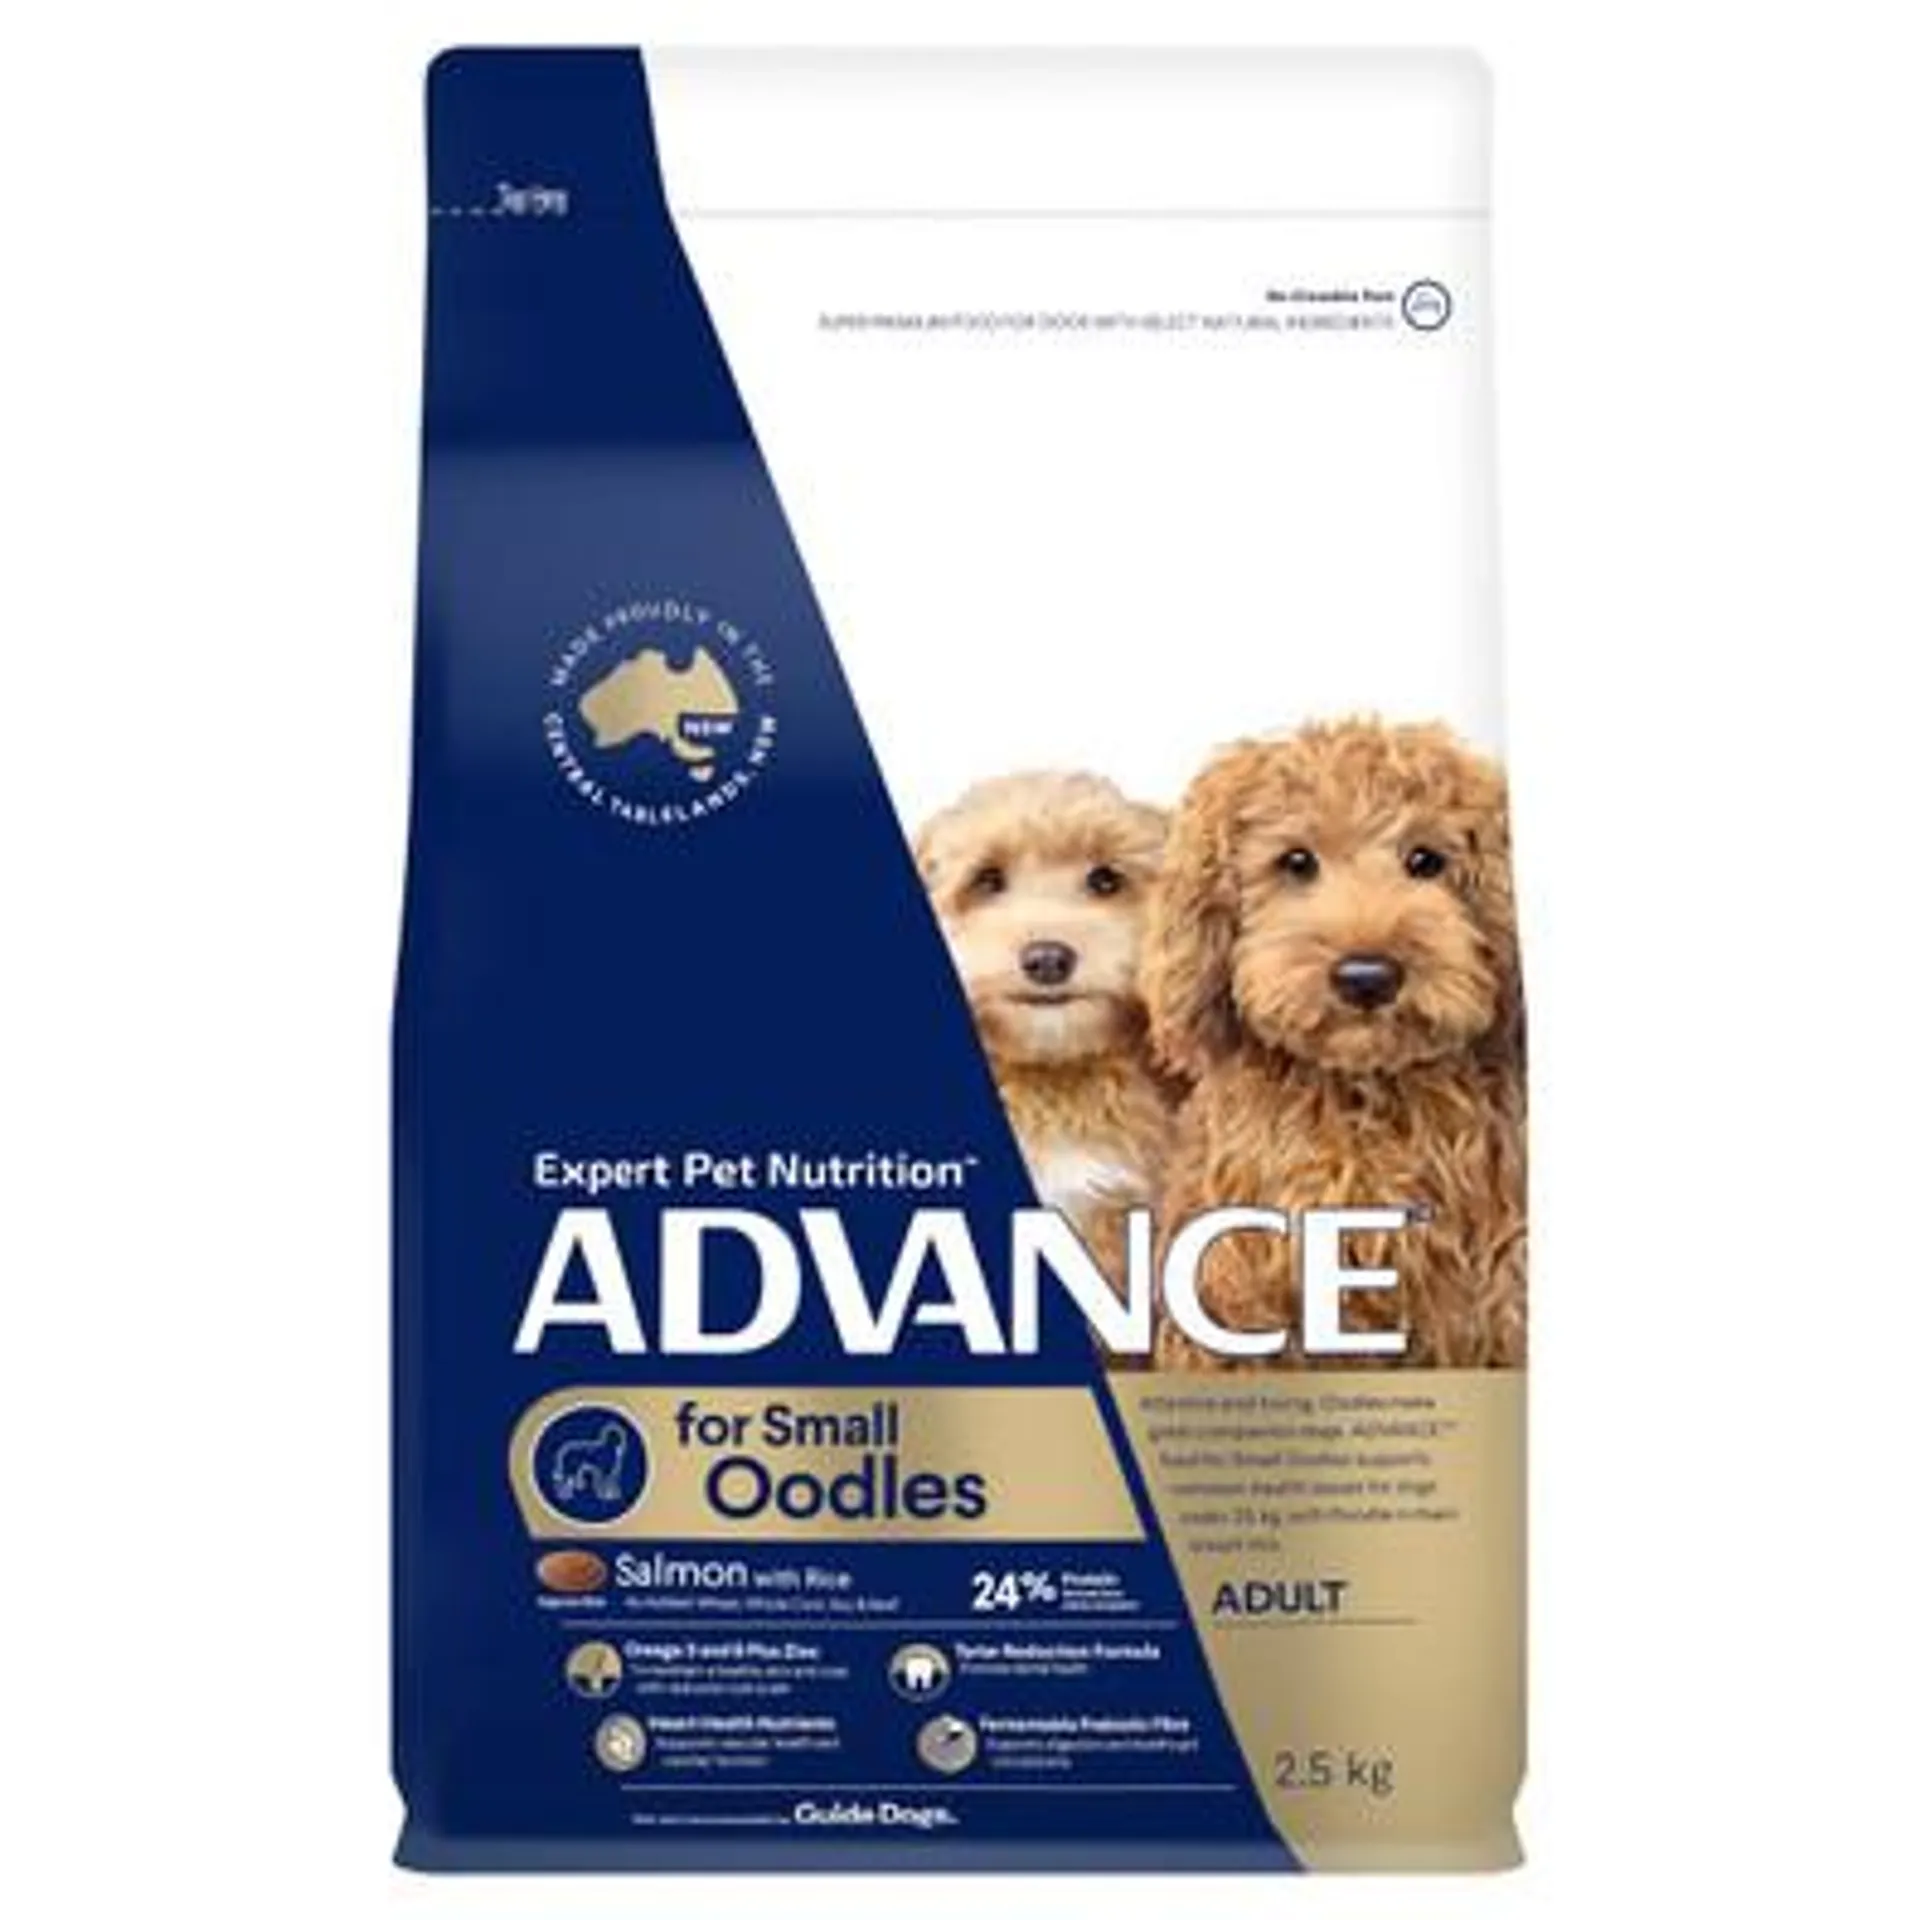 ADVANCE Small Oodles Salmon with Rice Dry Dog Food